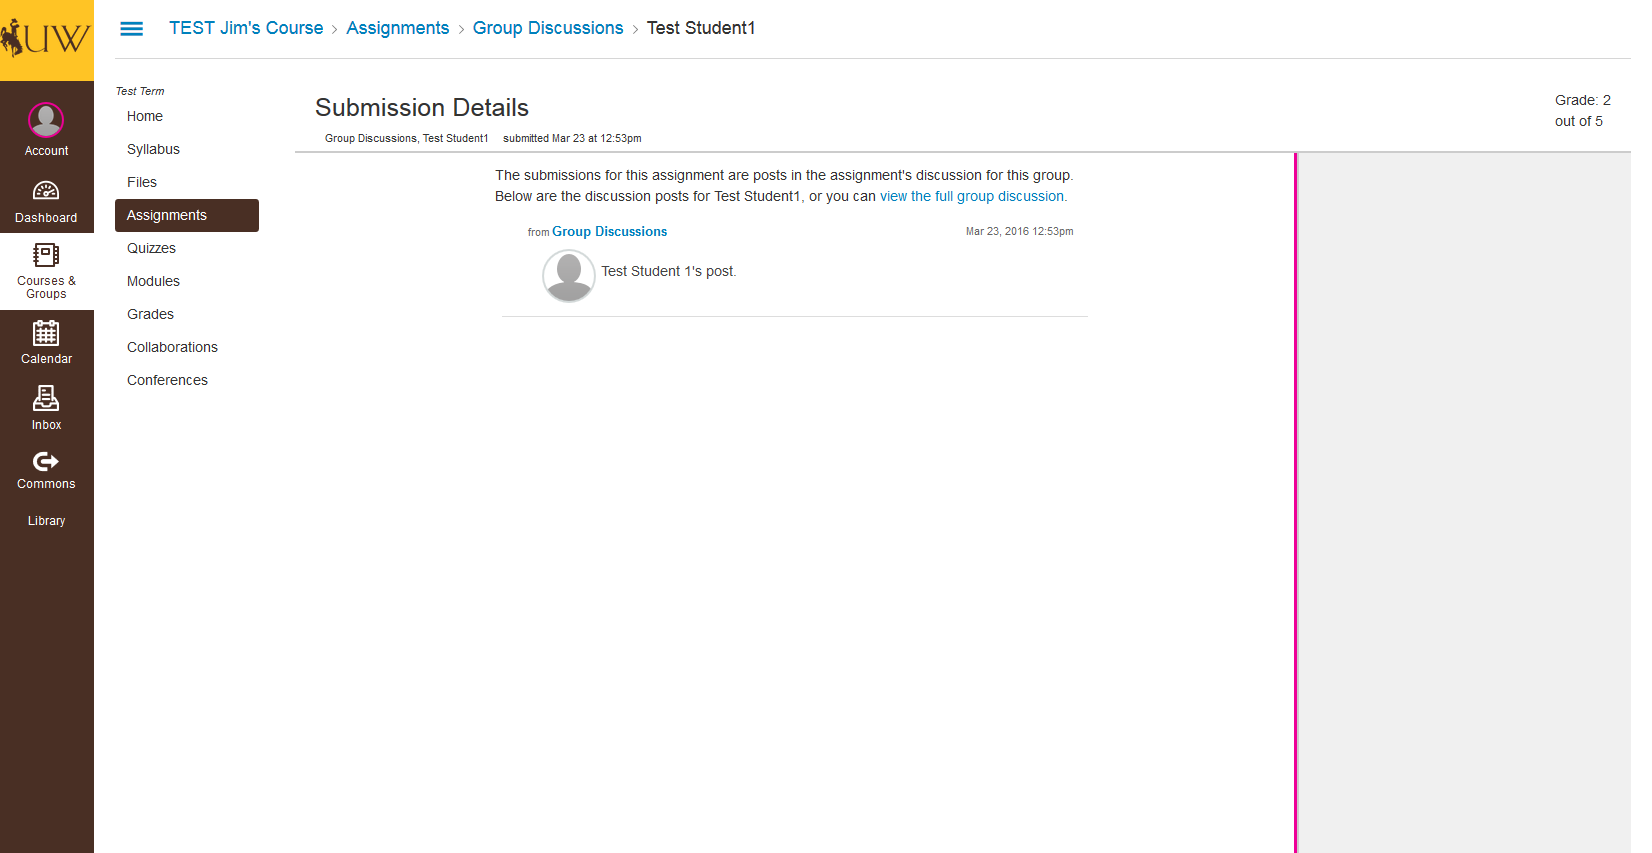 image showing advisor can see discussion contributions by student